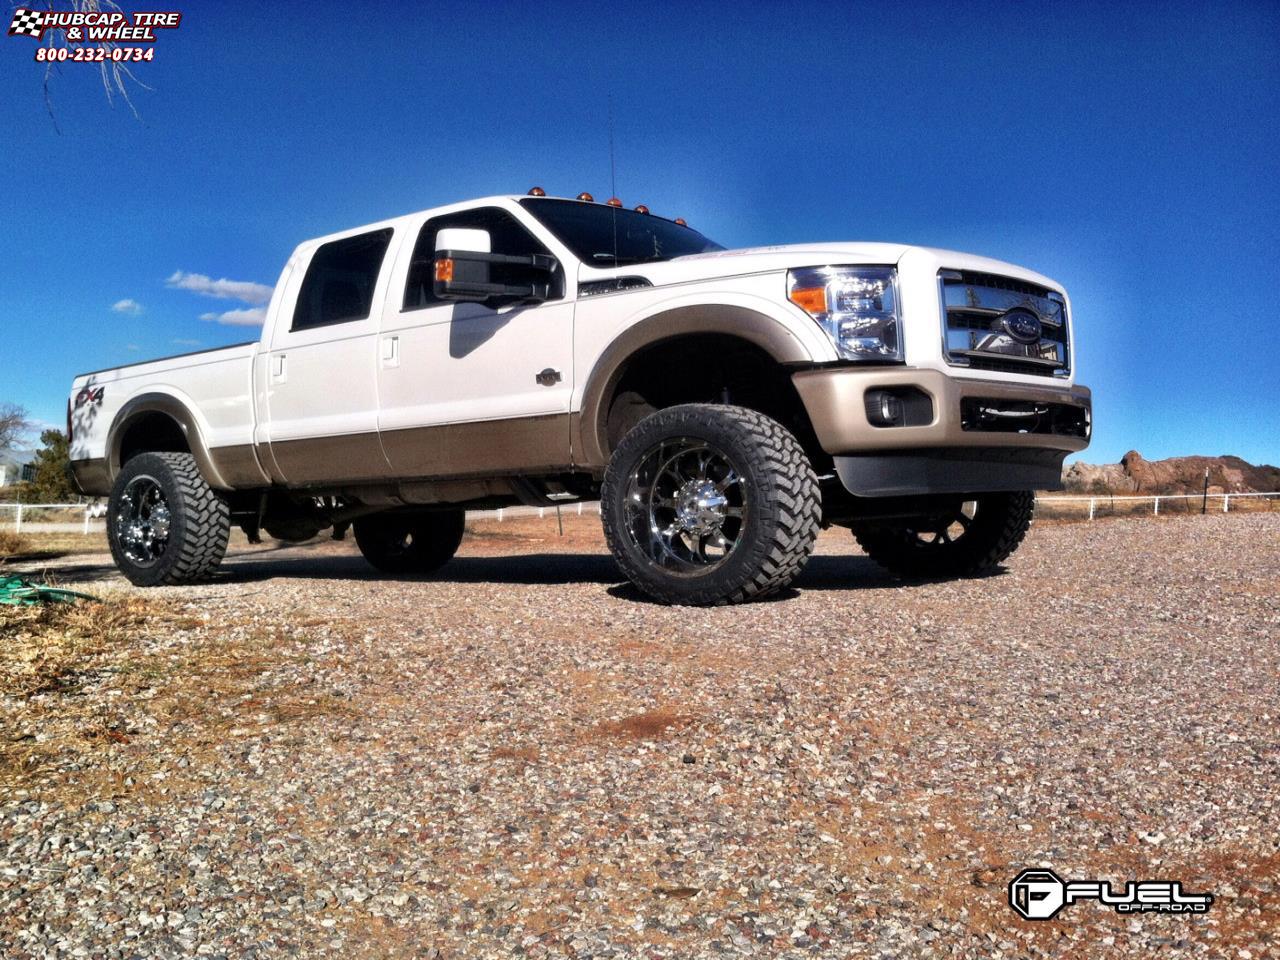 vehicle gallery/ford f 250 fuel krank d516 0X0  Chrome wheels and rims